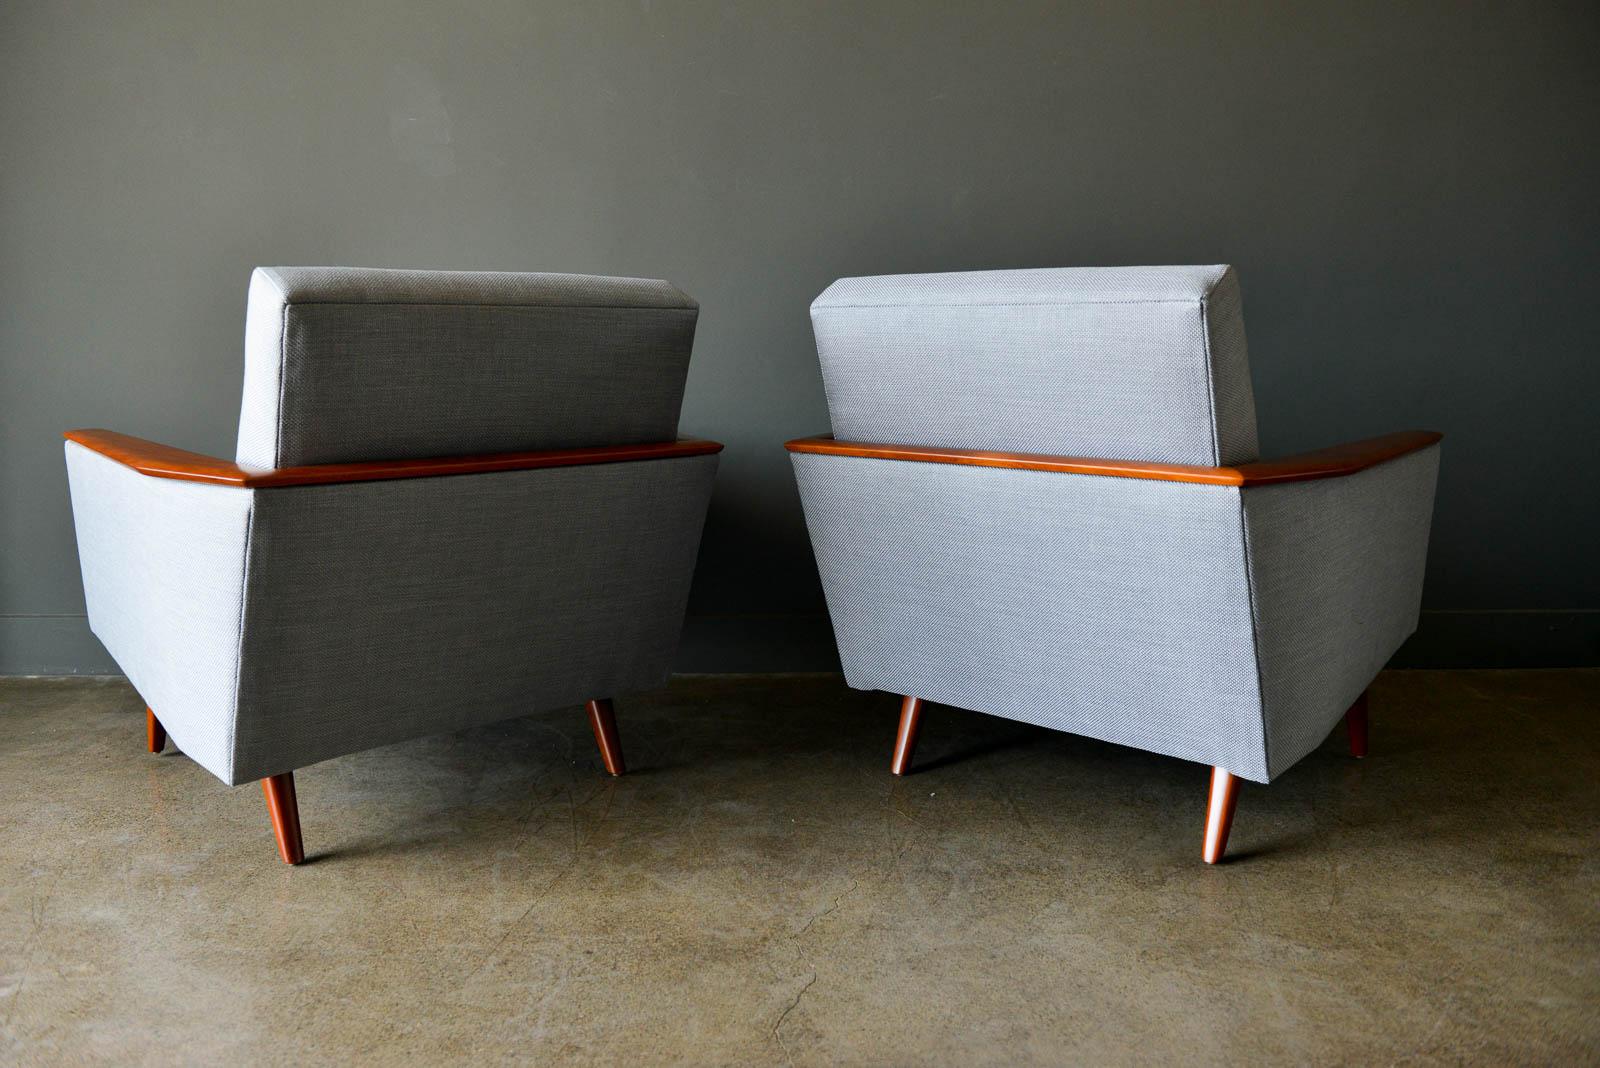 Fabric Pair of Mid-Century Modern Wood Framed Lounge Chairs, circa 1960